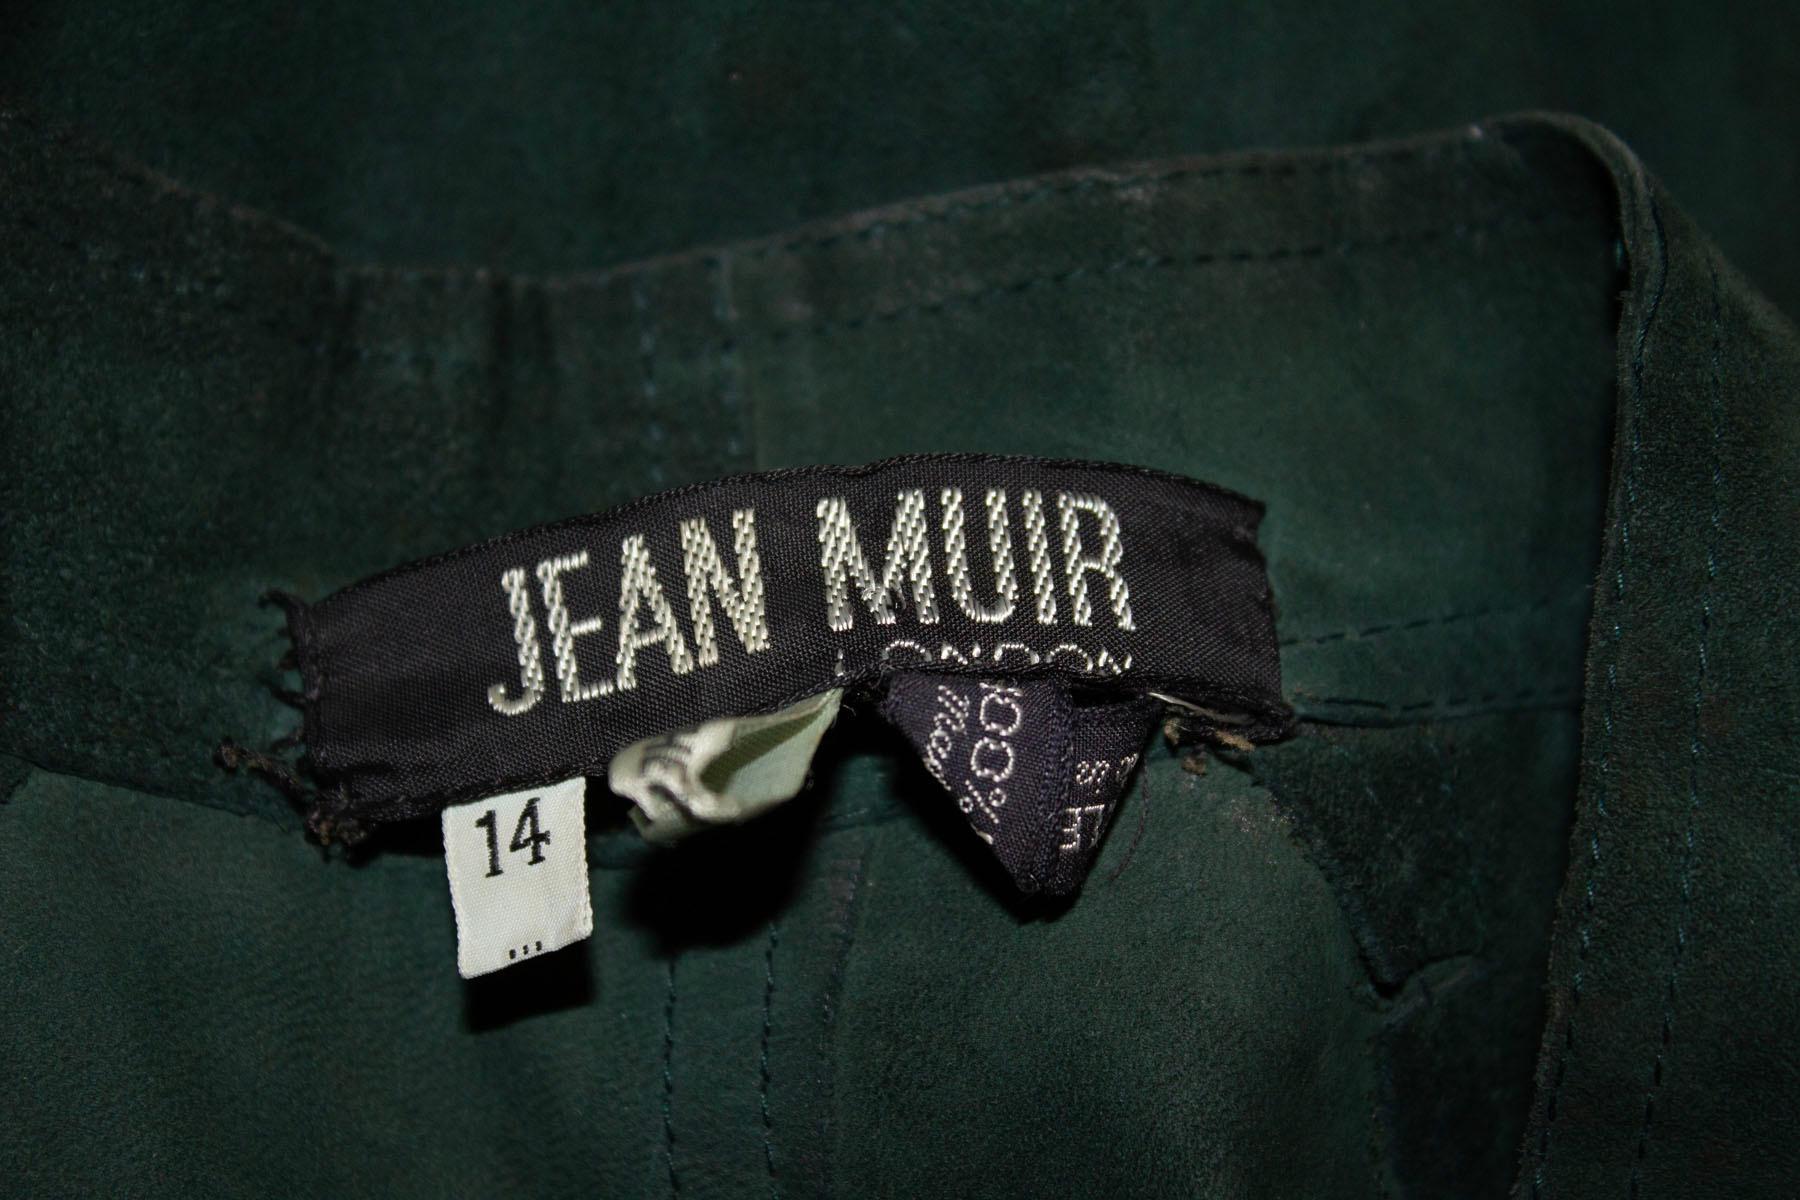 A great dress for Fall / winter by Jean Muir , main line. The dress is in Christmas tree green suede. It has a button through front opening with an elasticated waist and button cuffs. The dress has attractive punch detail on the suede, and is